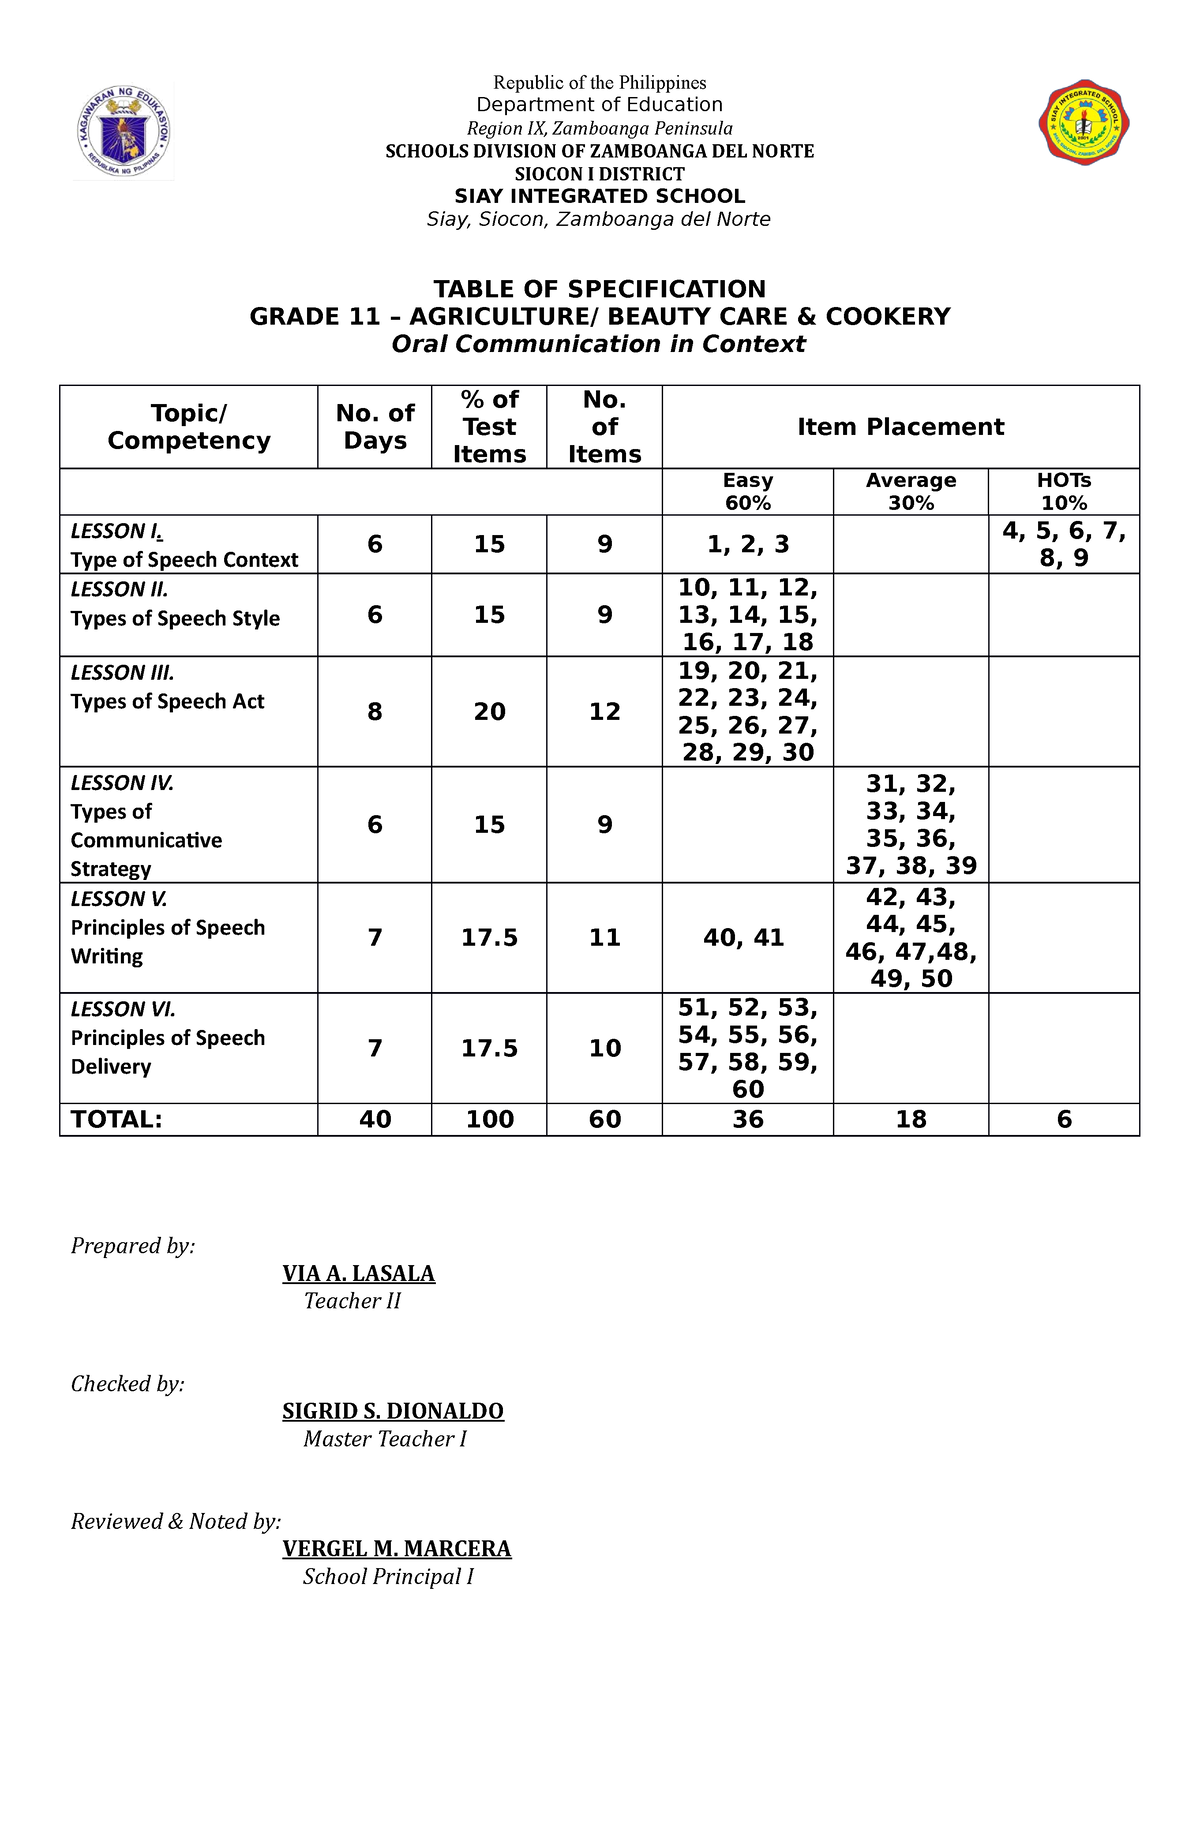 OC - TOS 2nd Quarter - Table of Specification - Republic of the ...